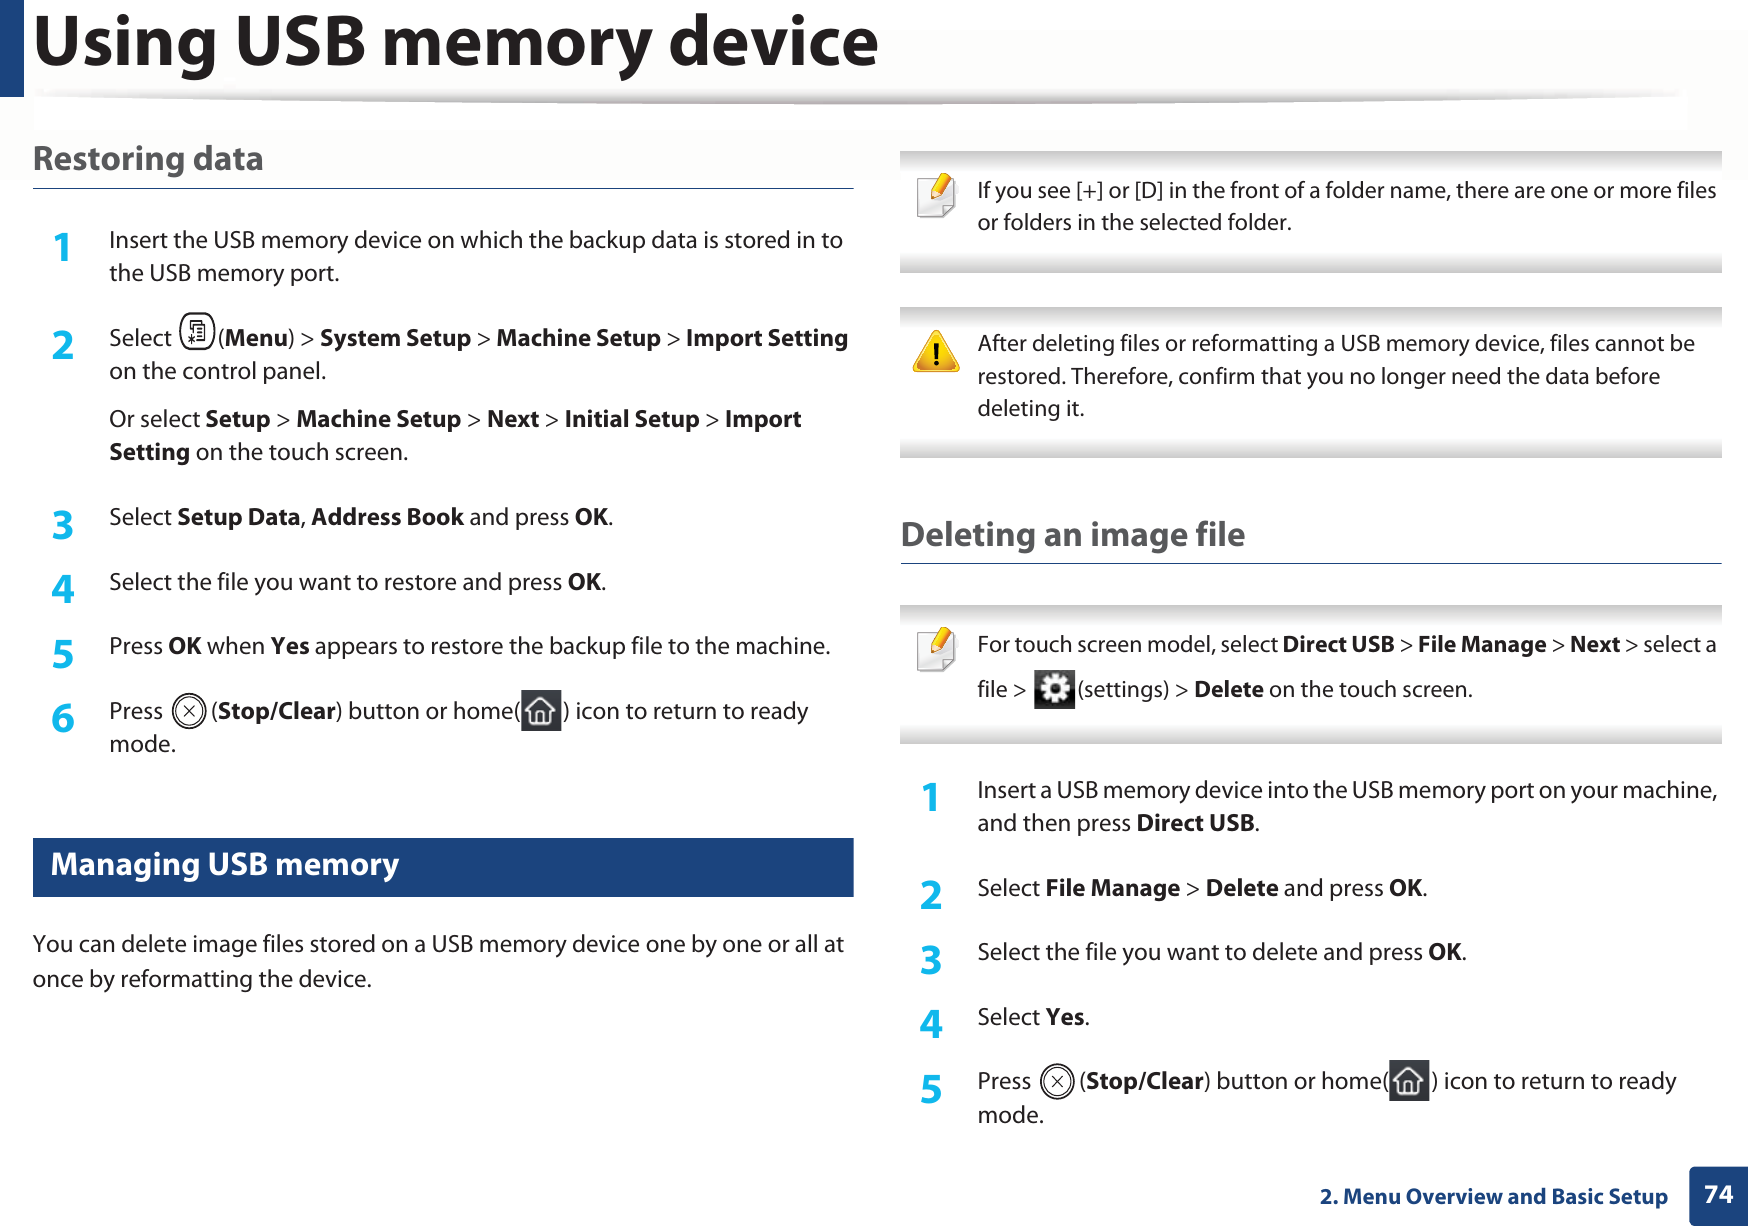 Using USB memory device742. Menu Overview and Basic SetupRestoring data1Insert the USB memory device on which the backup data is stored in to the USB memory port.2  Select (Menu) &gt; System Setup &gt; Machine Setup &gt; Import Setting on the control panel.Or select Setup &gt; Machine Setup &gt; Next &gt; Initial Setup &gt; Import Setting on the touch screen.3  Select Setup Data, Address Book and press OK. 4  Select the file you want to restore and press OK.5  Press OK when Yes appears to restore the backup file to the machine.6  Press (Stop/Clear) button or home( ) icon to return to ready mode.28 Managing USB memoryYou can delete image files stored on a USB memory device one by one or all at once by reformatting the device. If you see [+] or [D] in the front of a folder name, there are one or more files or folders in the selected folder.  After deleting files or reformatting a USB memory device, files cannot be restored. Therefore, confirm that you no longer need the data before deleting it. Deleting an image file For touch screen model, select Direct USB &gt; File Manage &gt; Next &gt; select a file &gt;  (settings) &gt; Delete on the touch screen. 1Insert a USB memory device into the USB memory port on your machine, and then press Direct USB.2  Select File Manage &gt; Delete and press OK.3  Select the file you want to delete and press OK.4  Select Yes.5  Press (Stop/Clear) button or home( ) icon to return to ready mode.